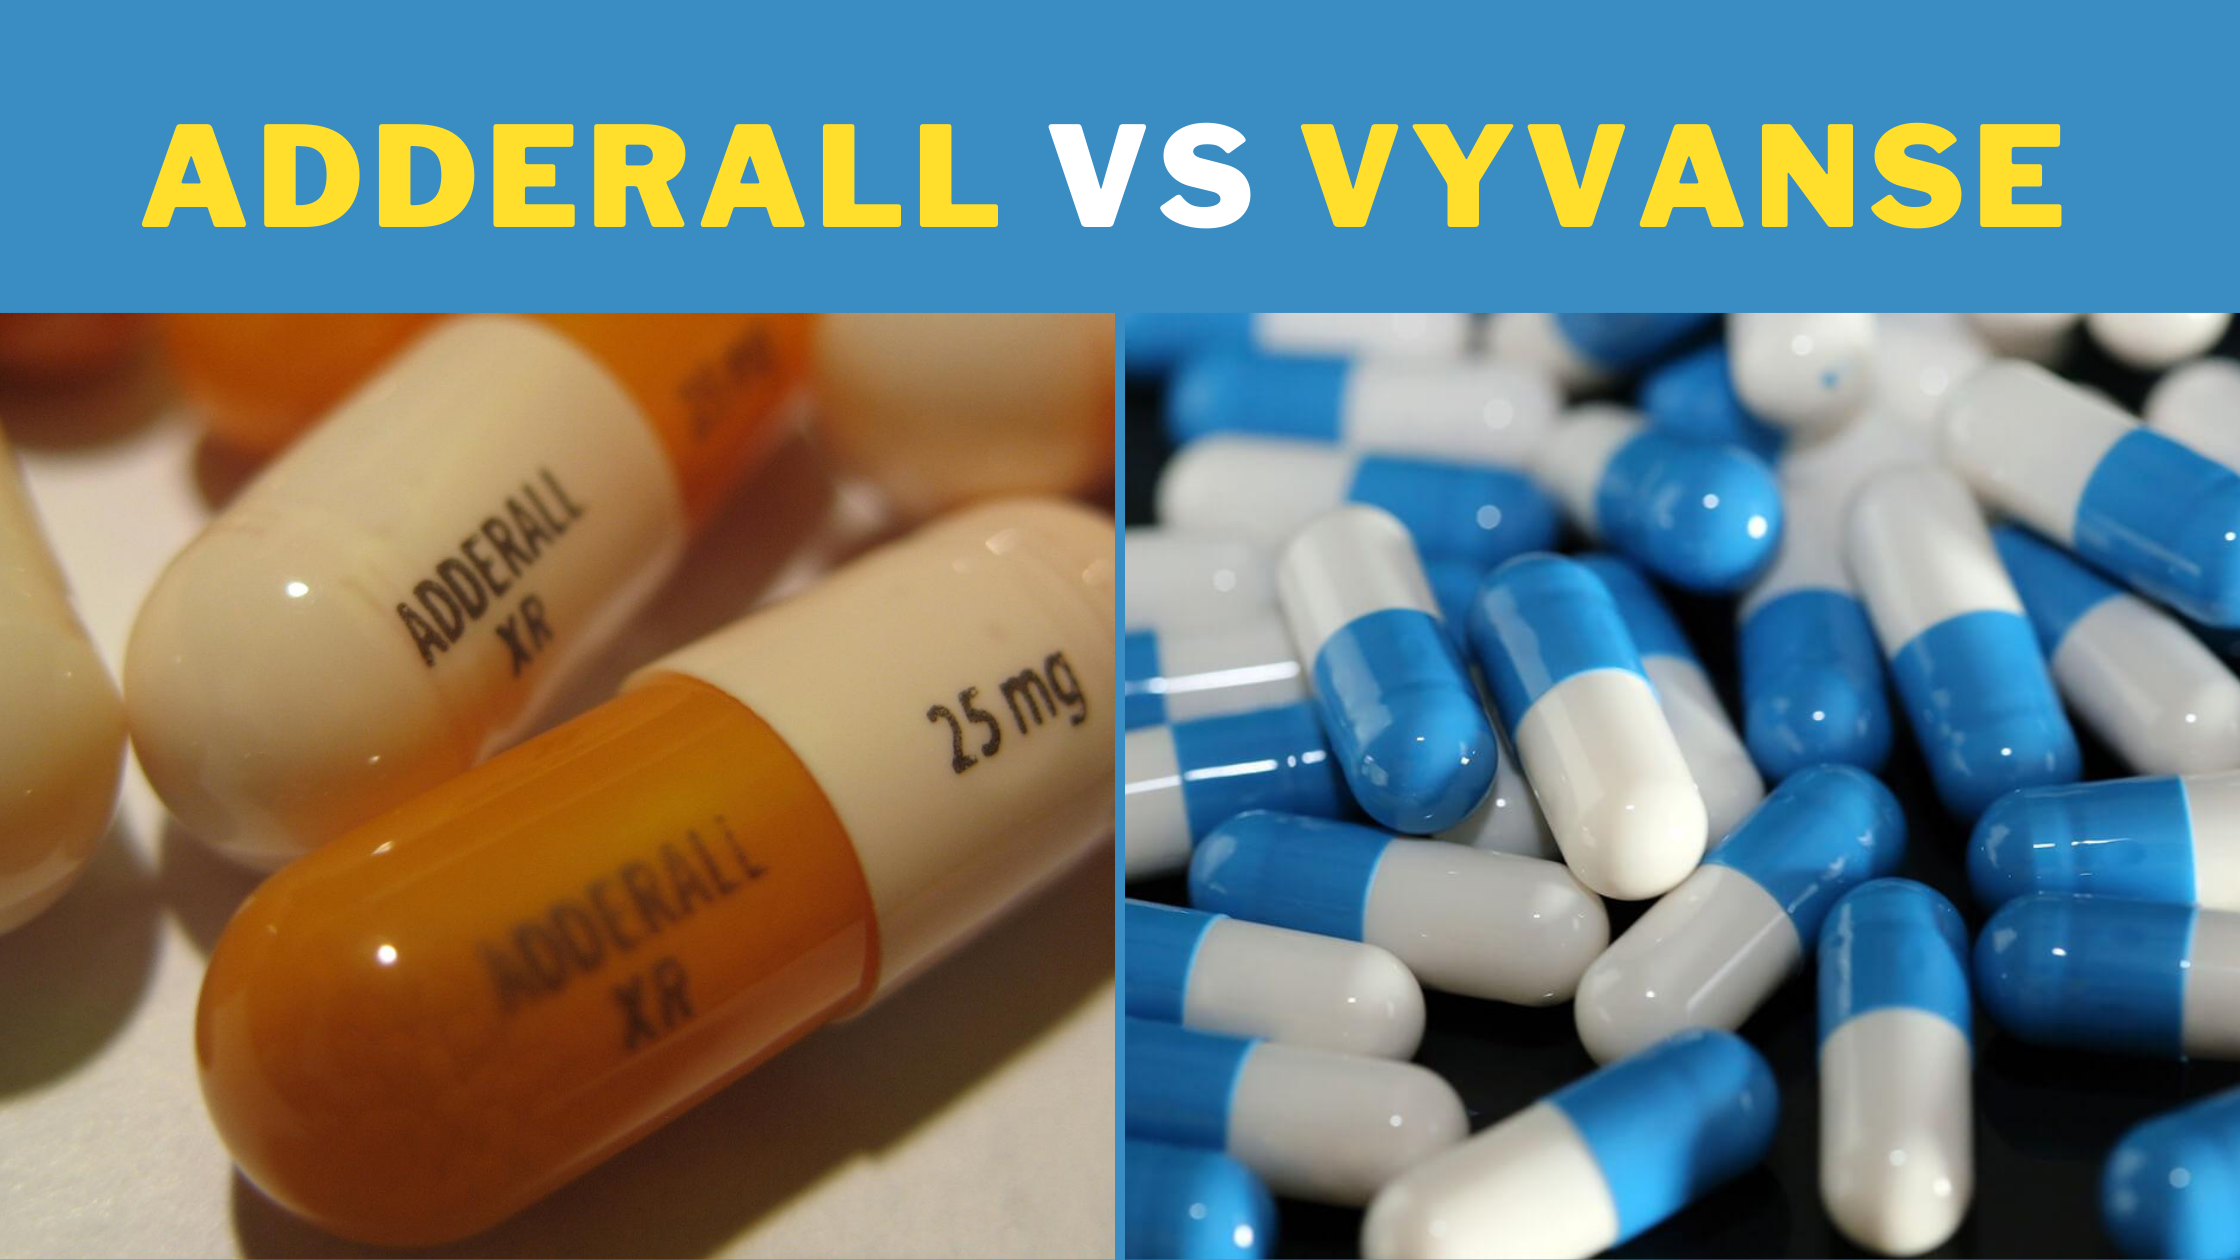 Adderall vs Vyvanse 7 Similarities And Differences You Should Know